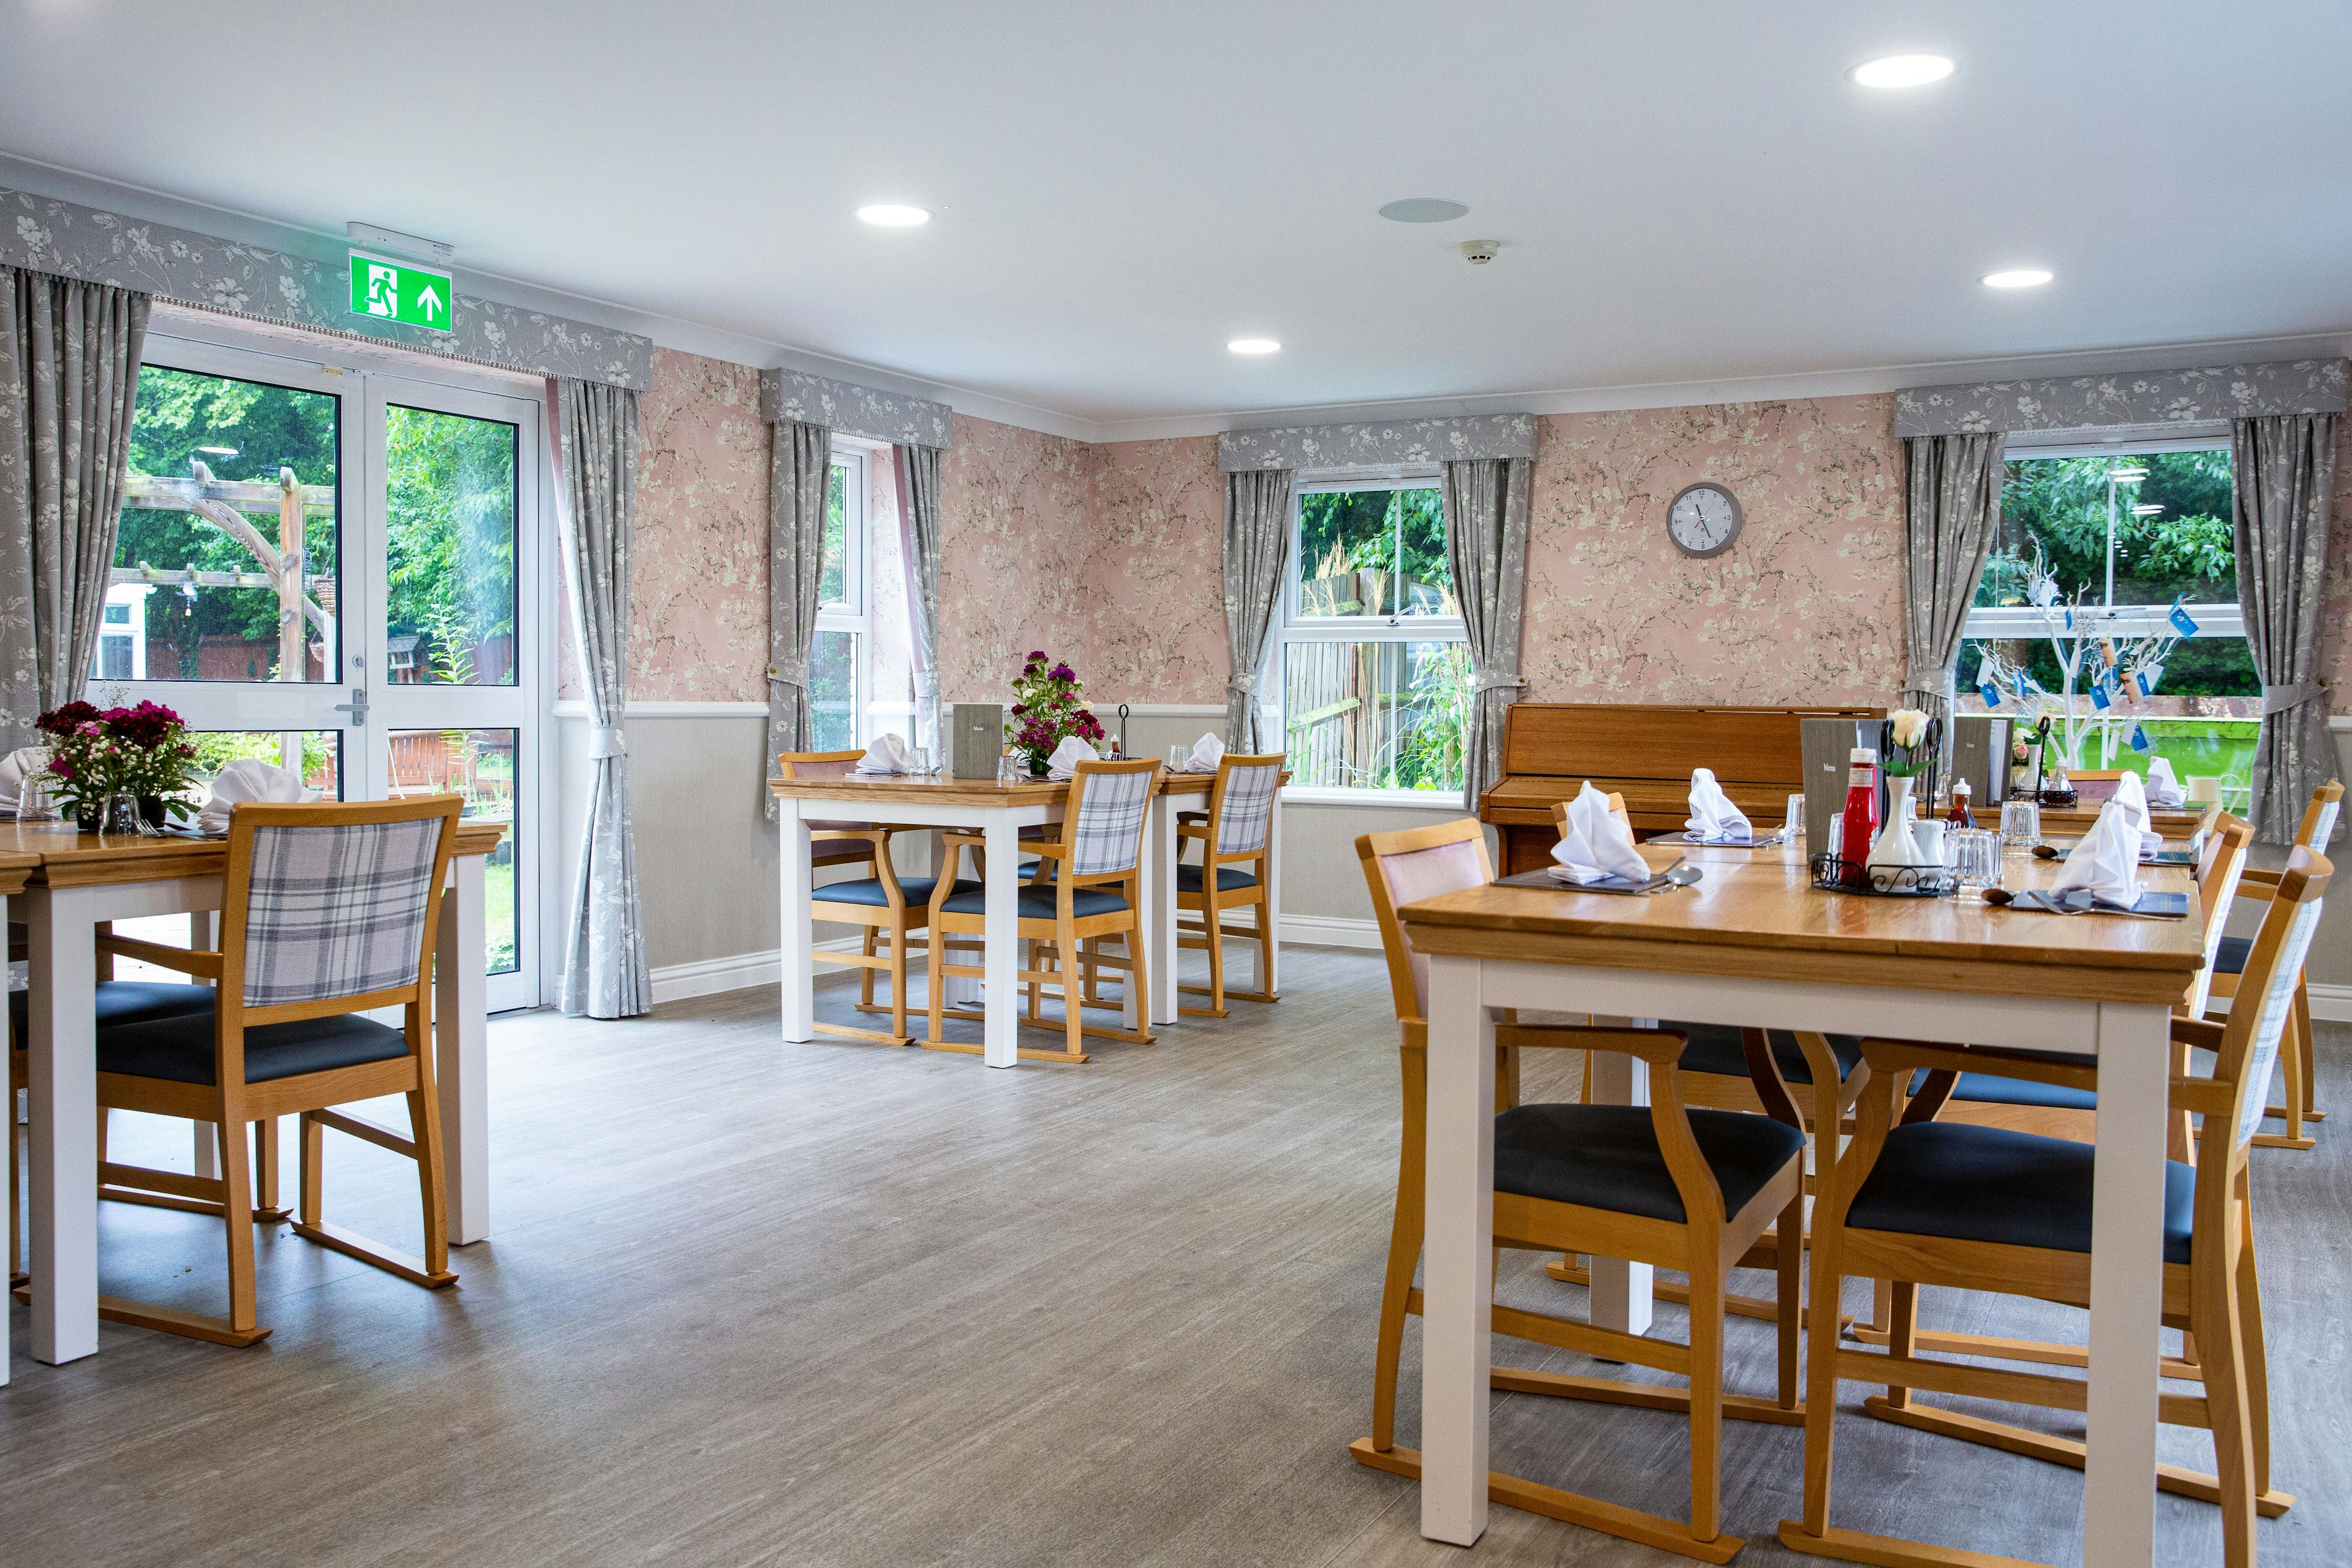 Dining area of Candlewood House care home in Harrow, Greater London